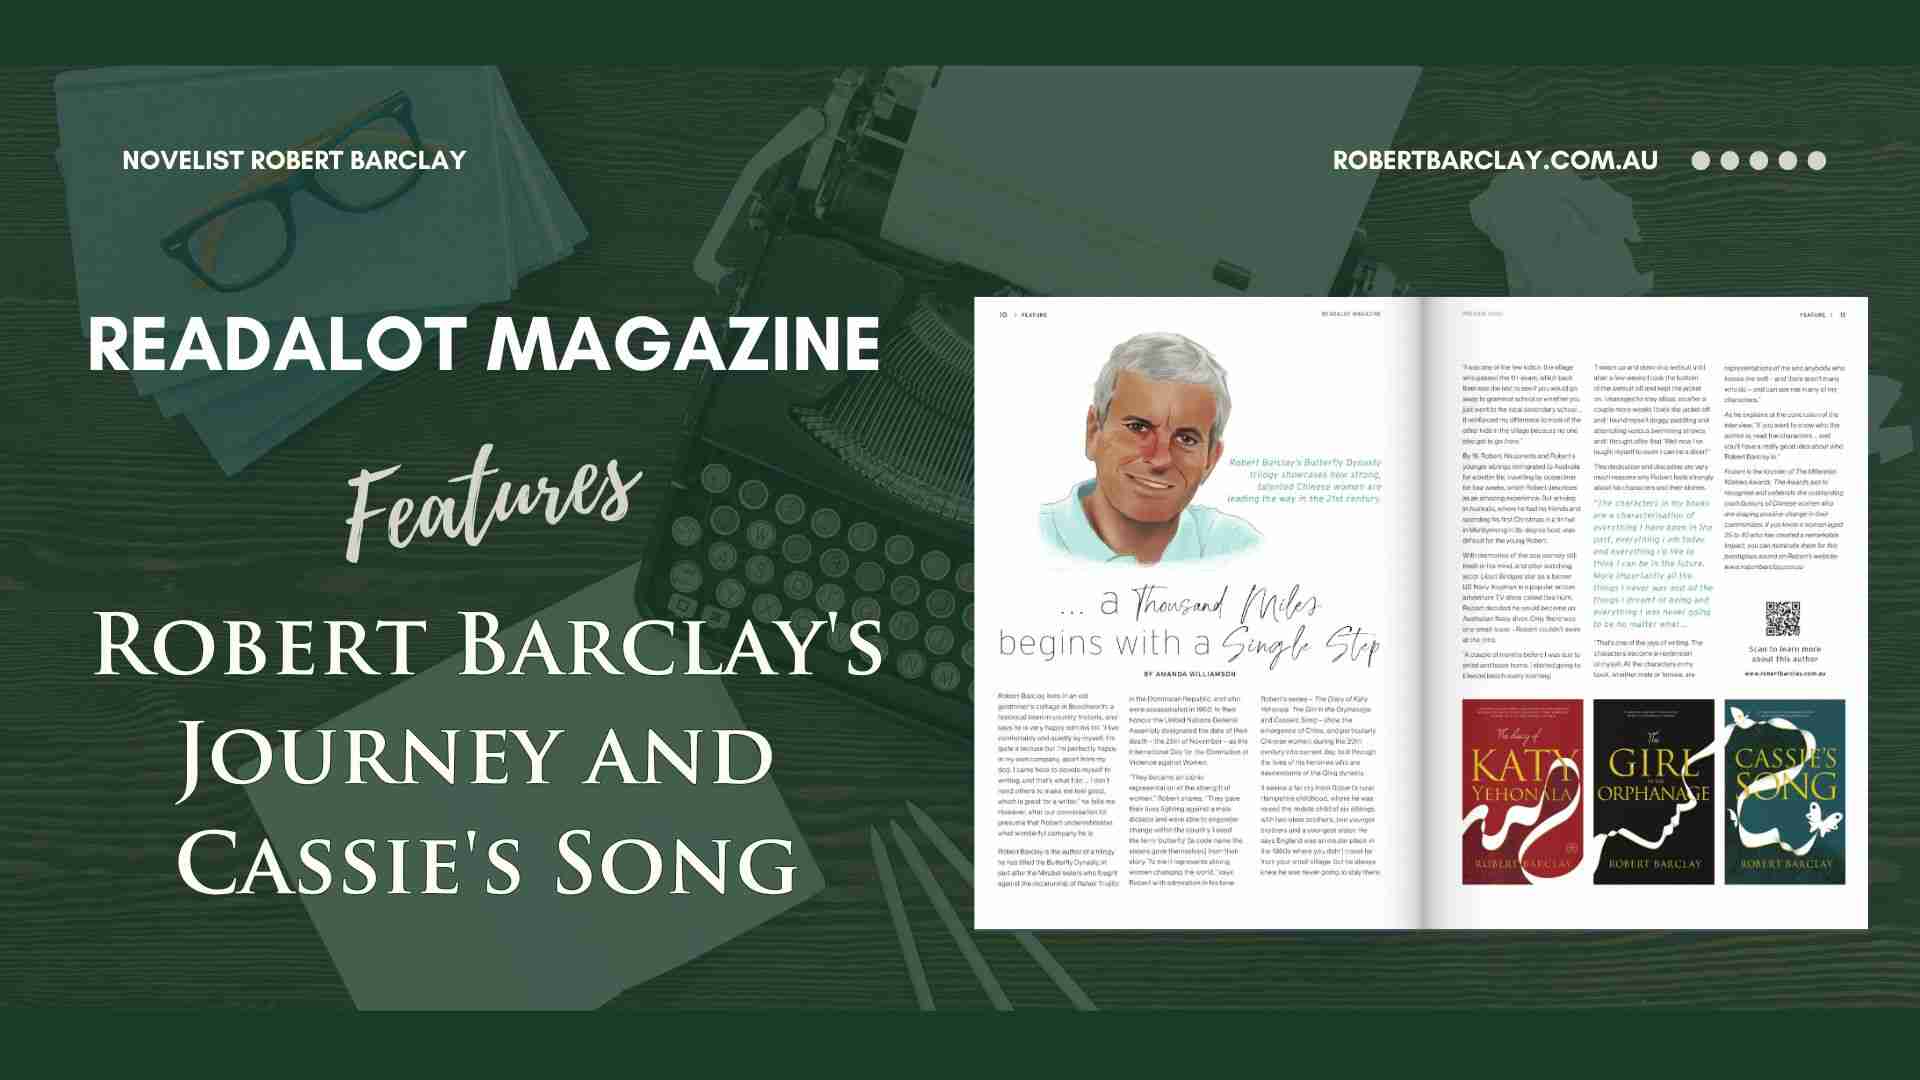 Readalot Magazine featuring Robert Barclay and Cassie's Song.